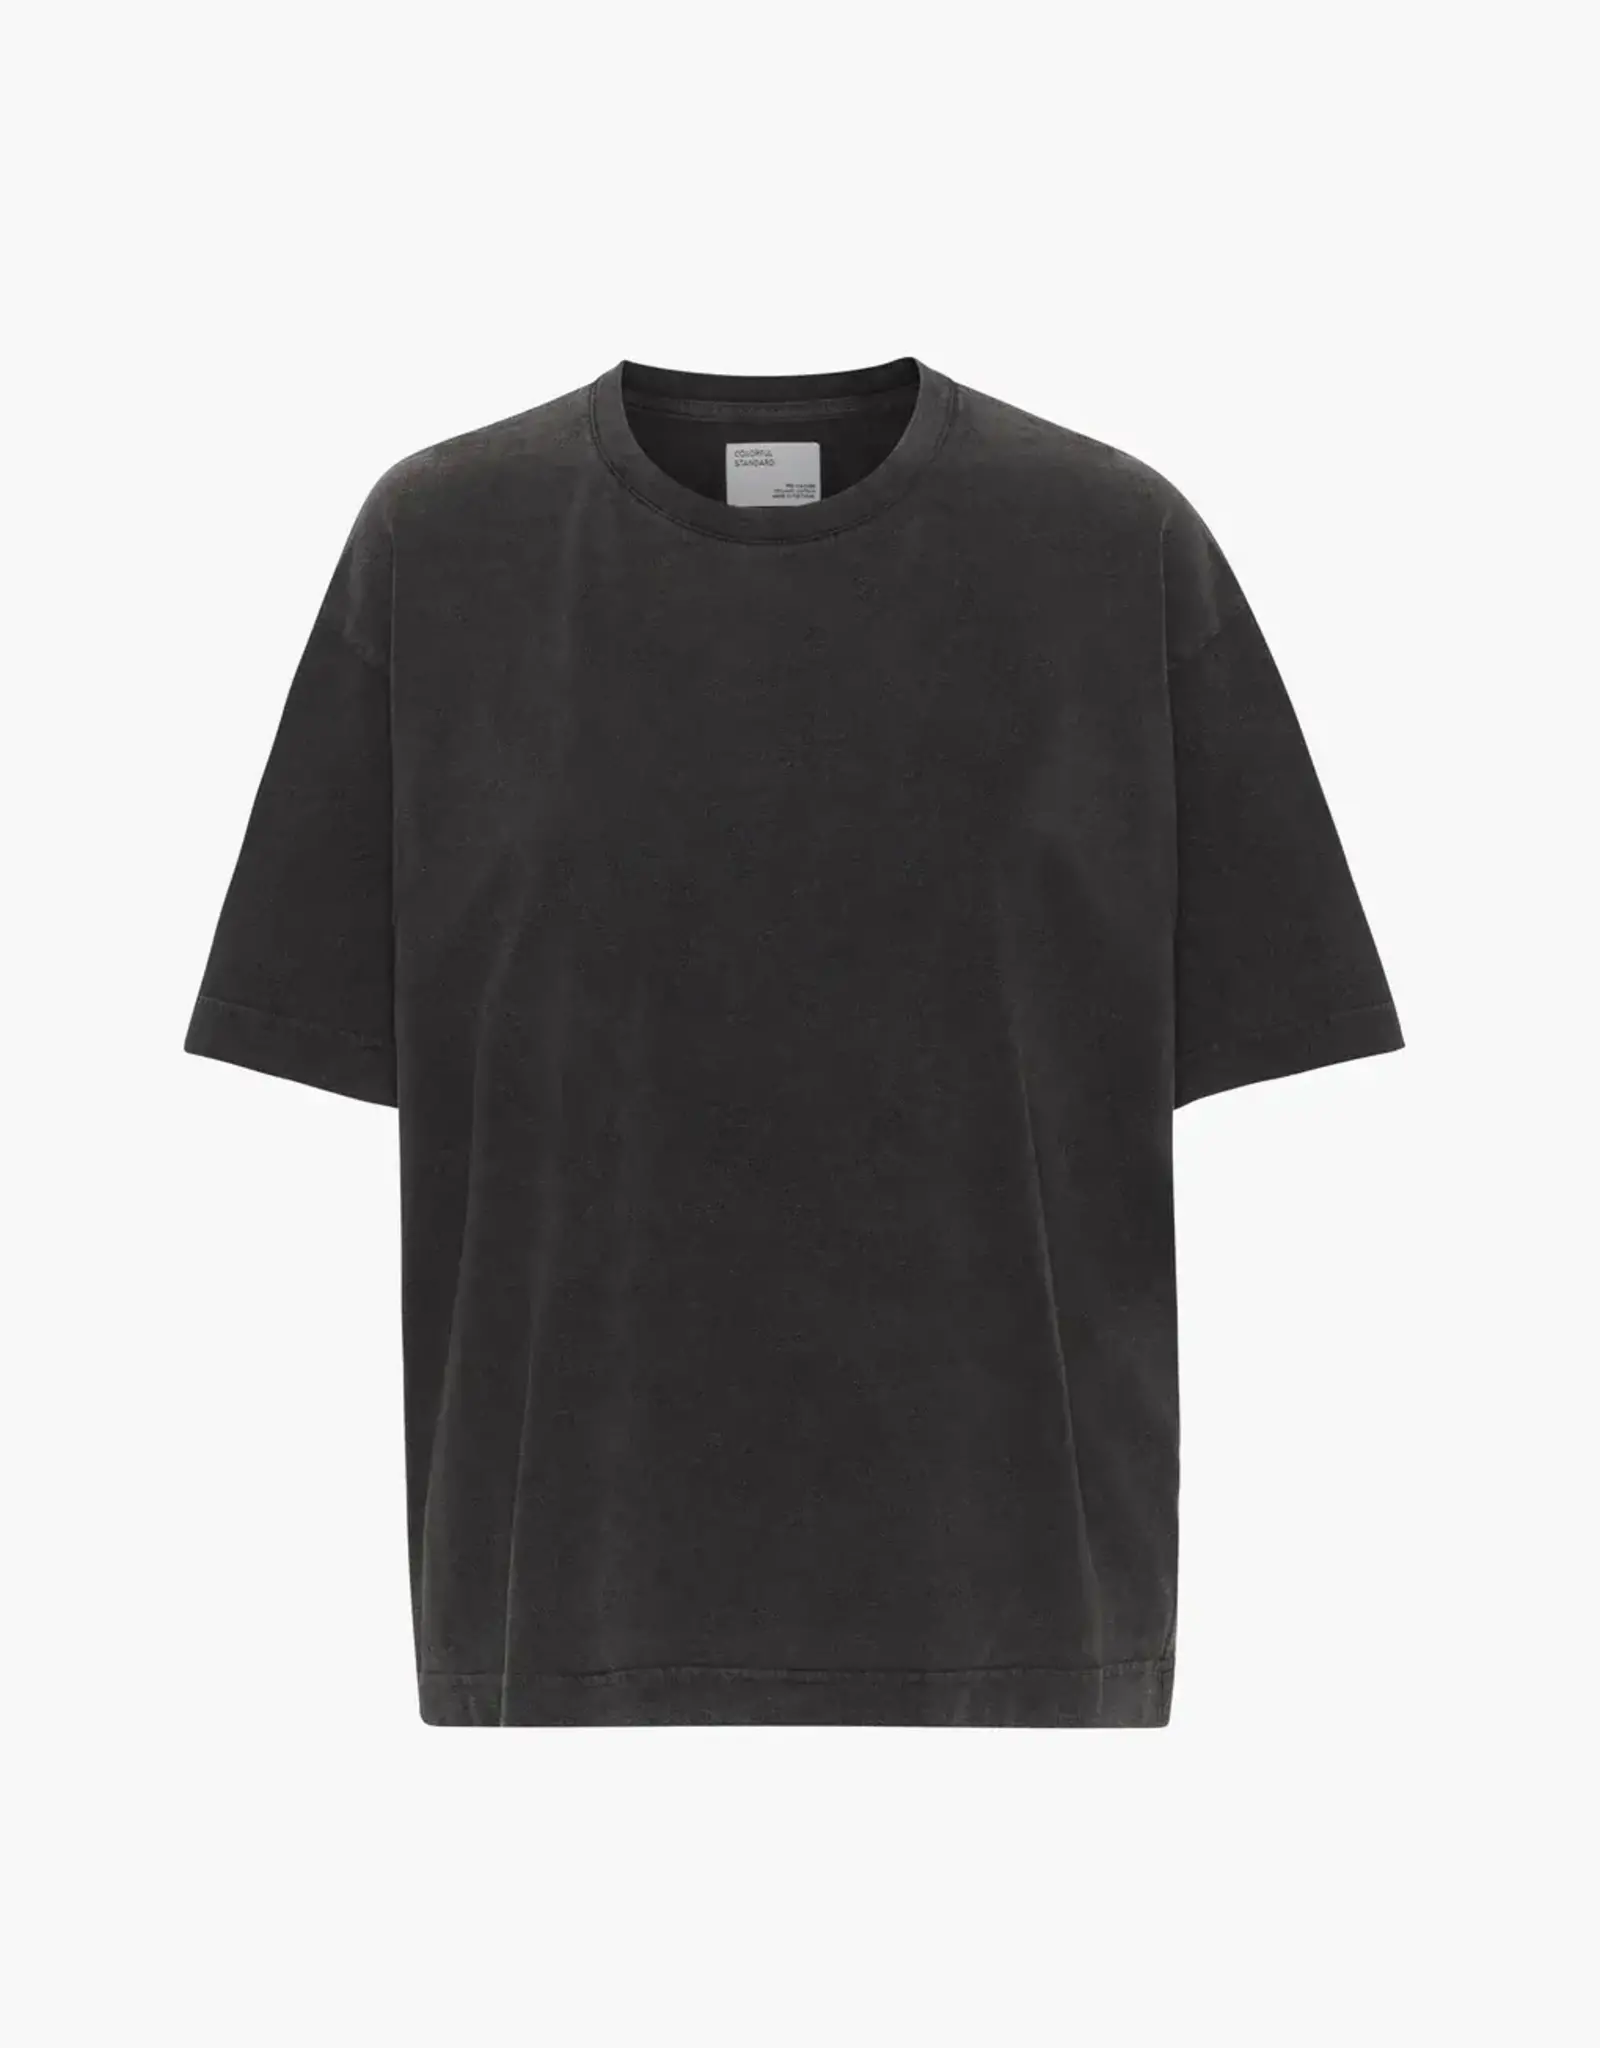 Colorful Standard T-Shirt 'Oversized Organic Tee' - Faded Black - Colorful Standard